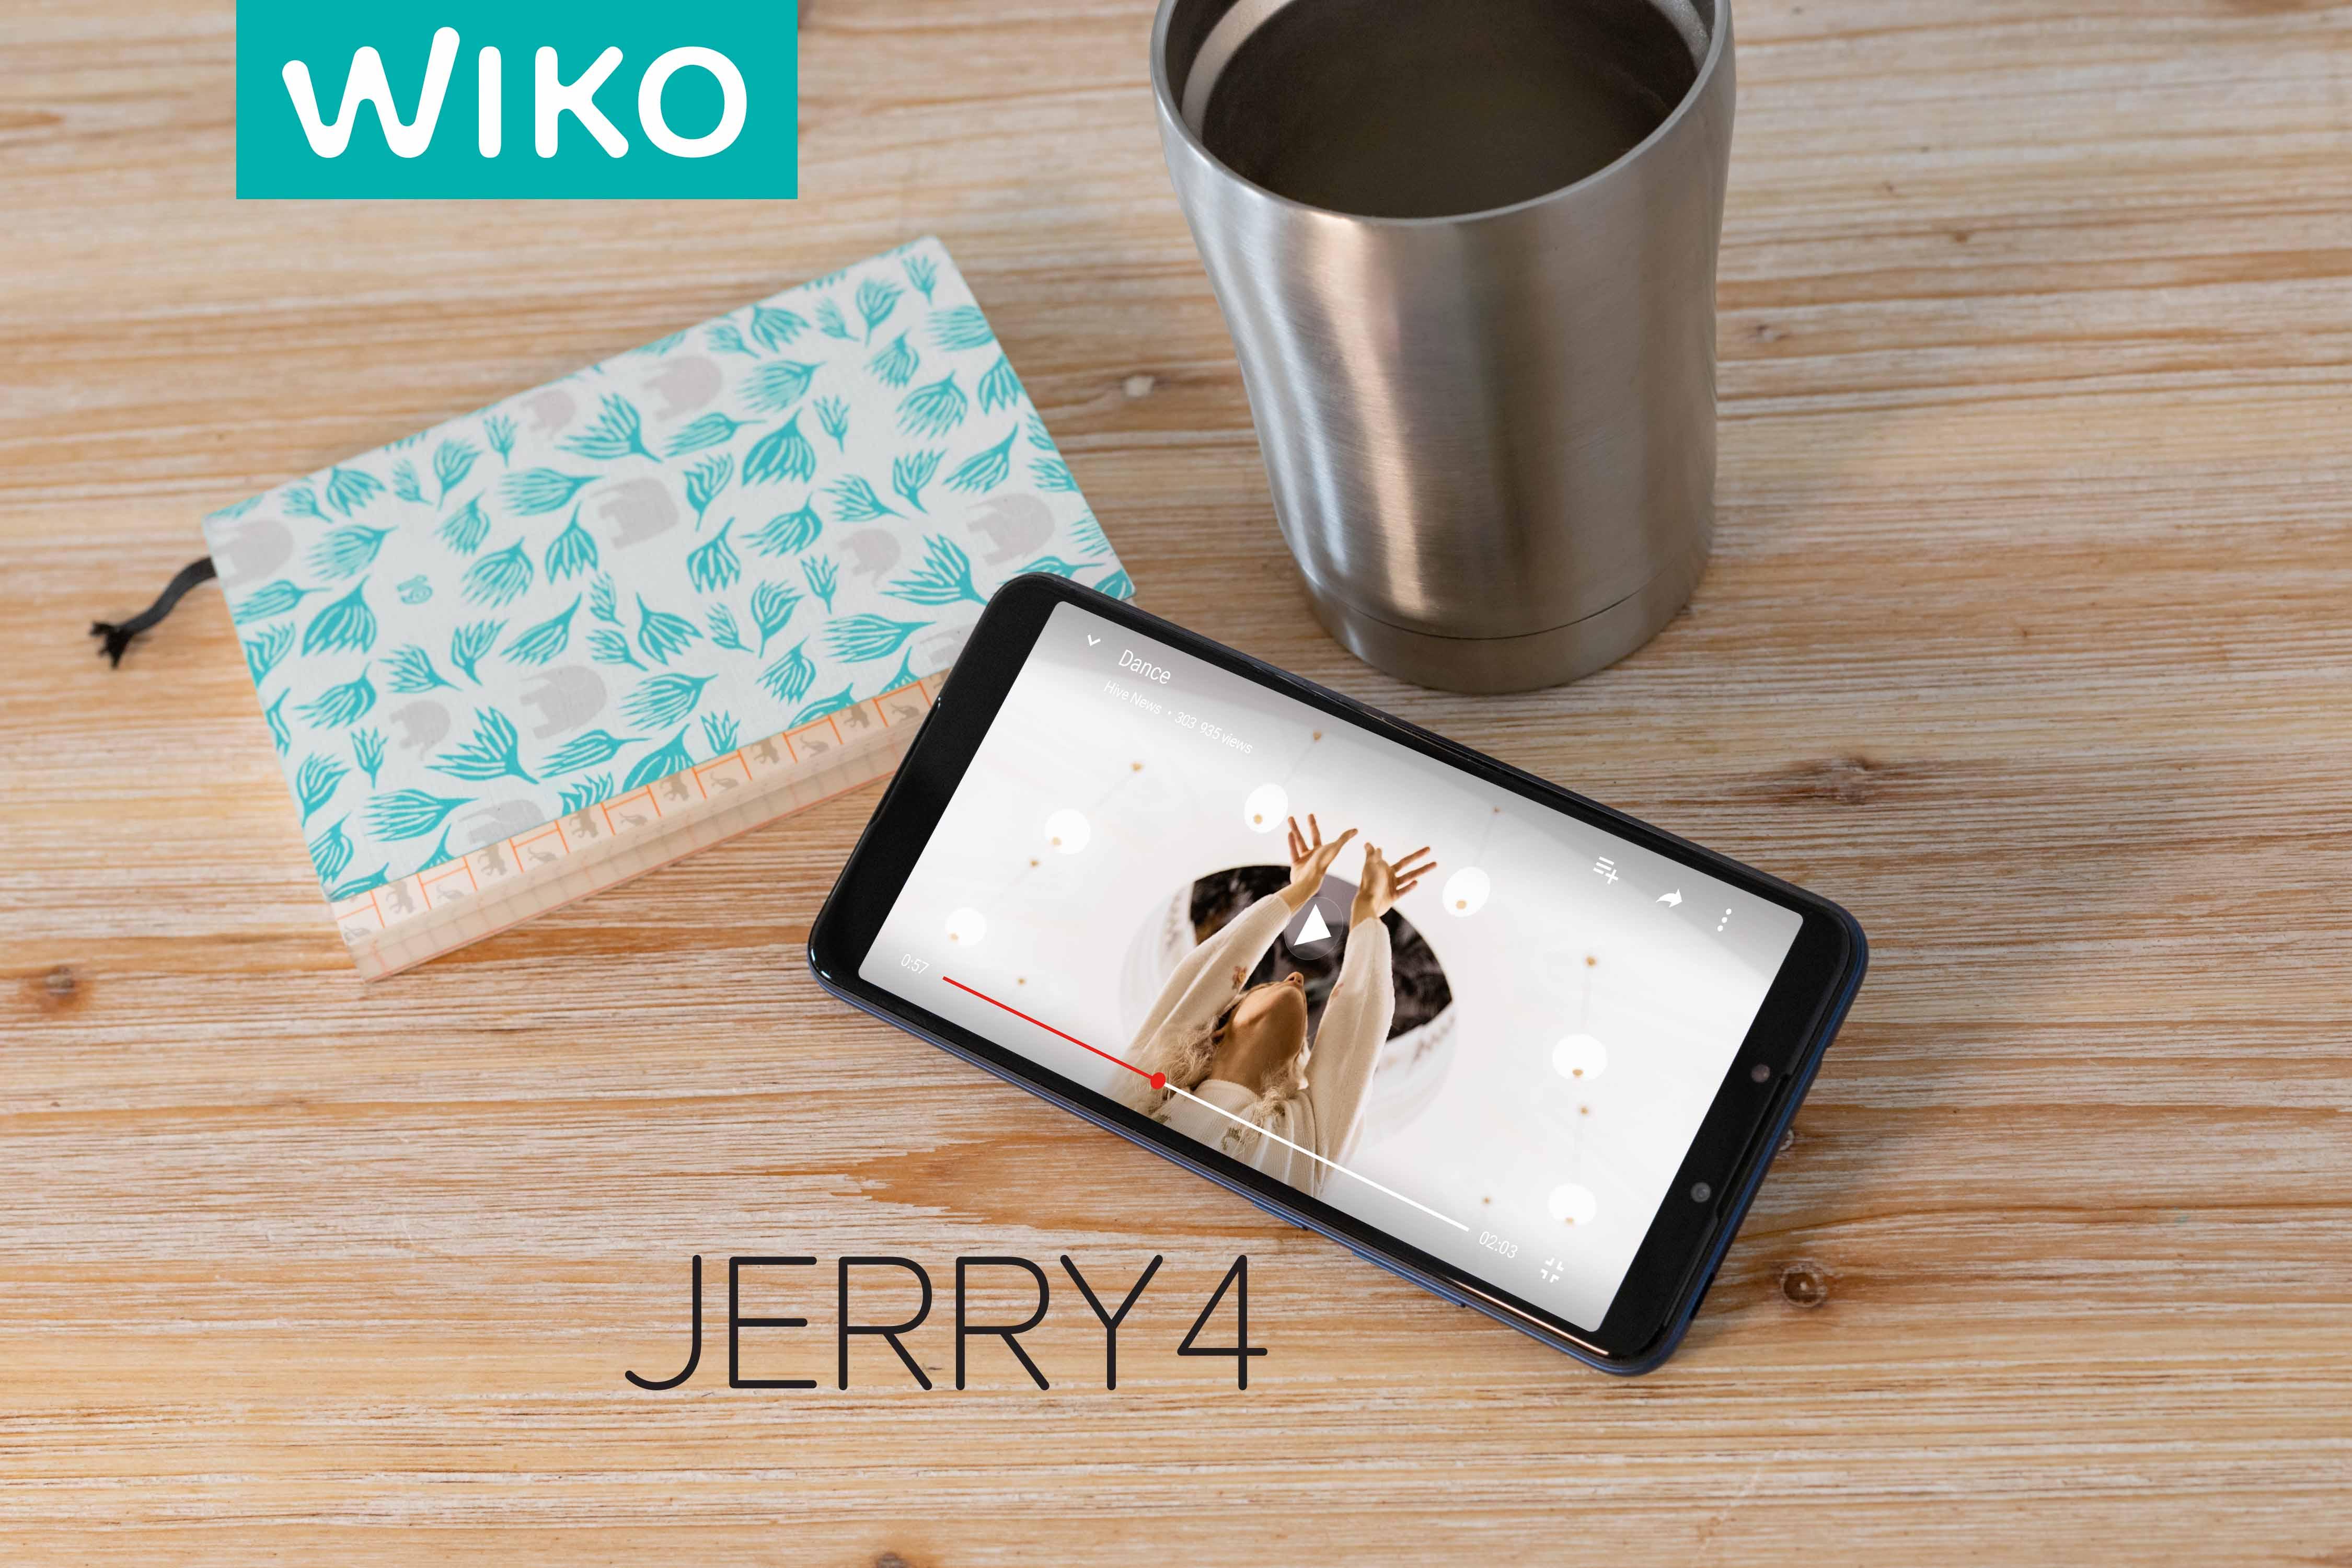 Wiko Jerry 4